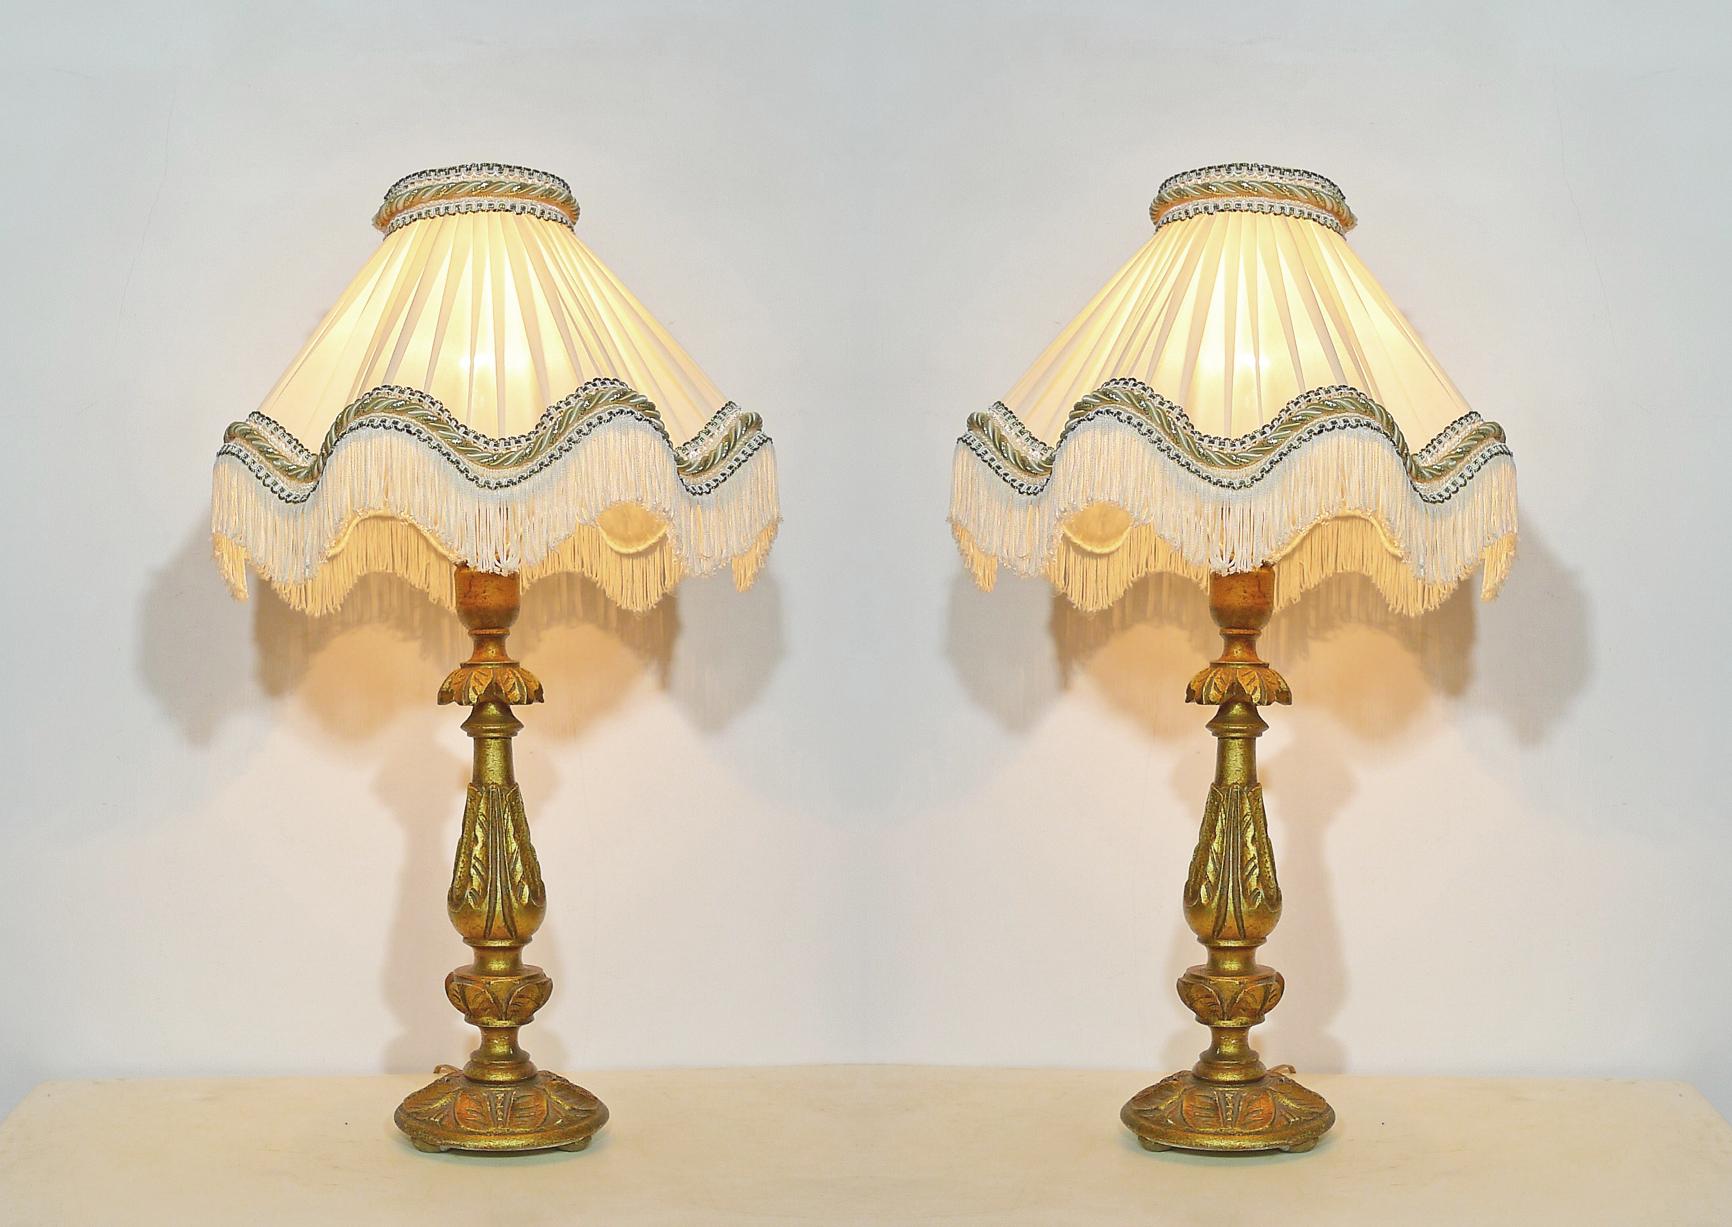 20th Century Pair of Italian Baroque Carved Giltwood Candlesticks Torchères Ivory Table Lamps